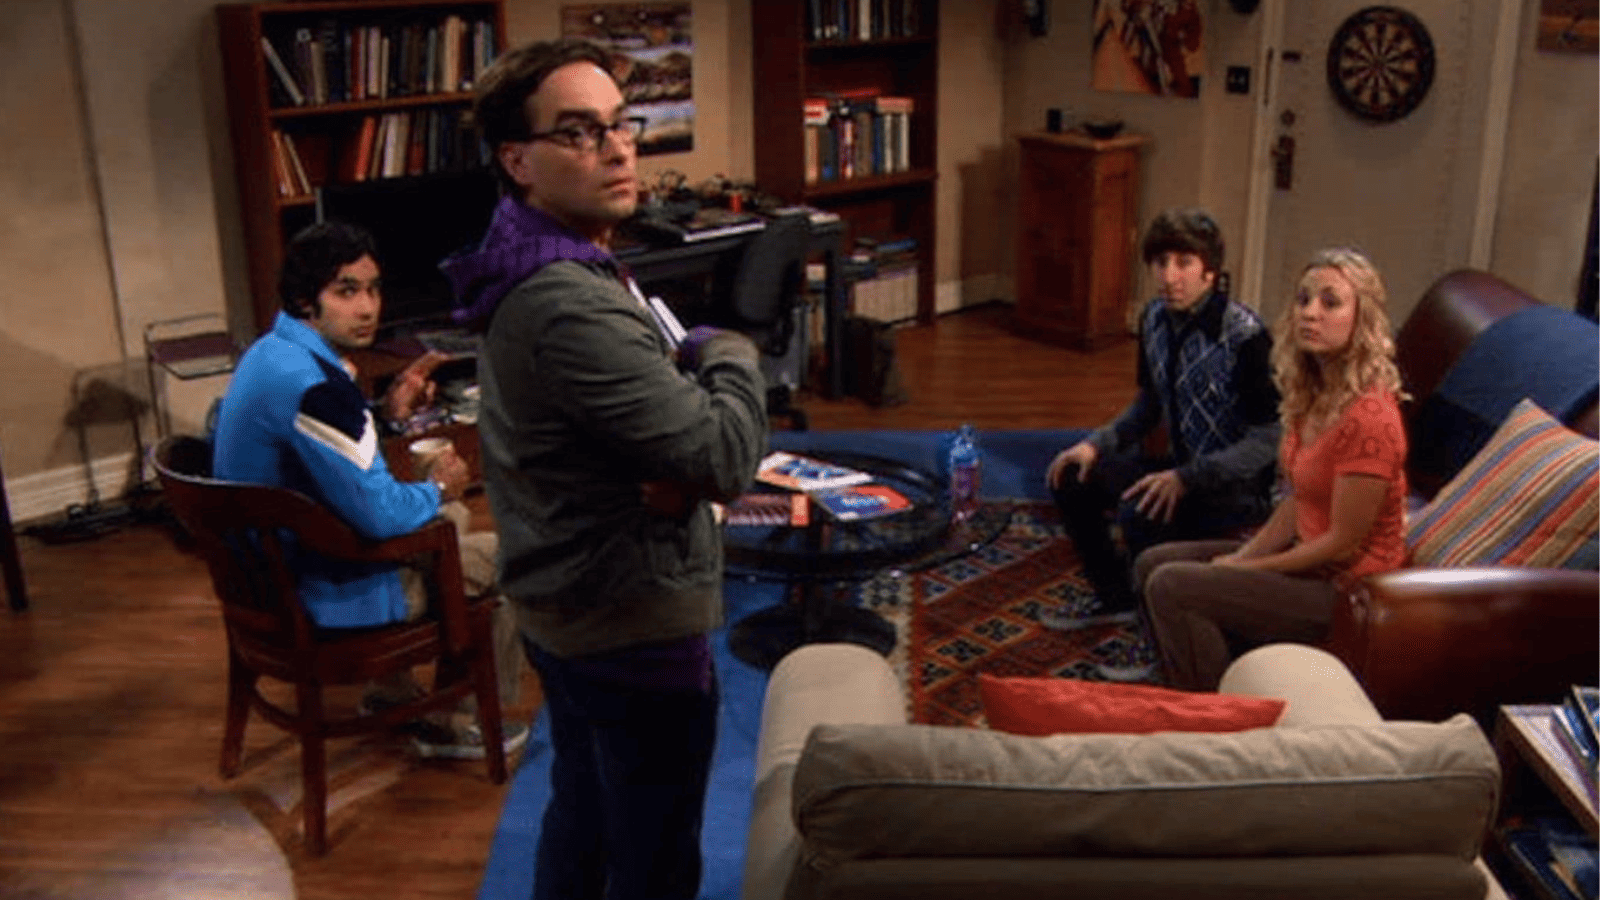 Scene from the Big Bang Theory